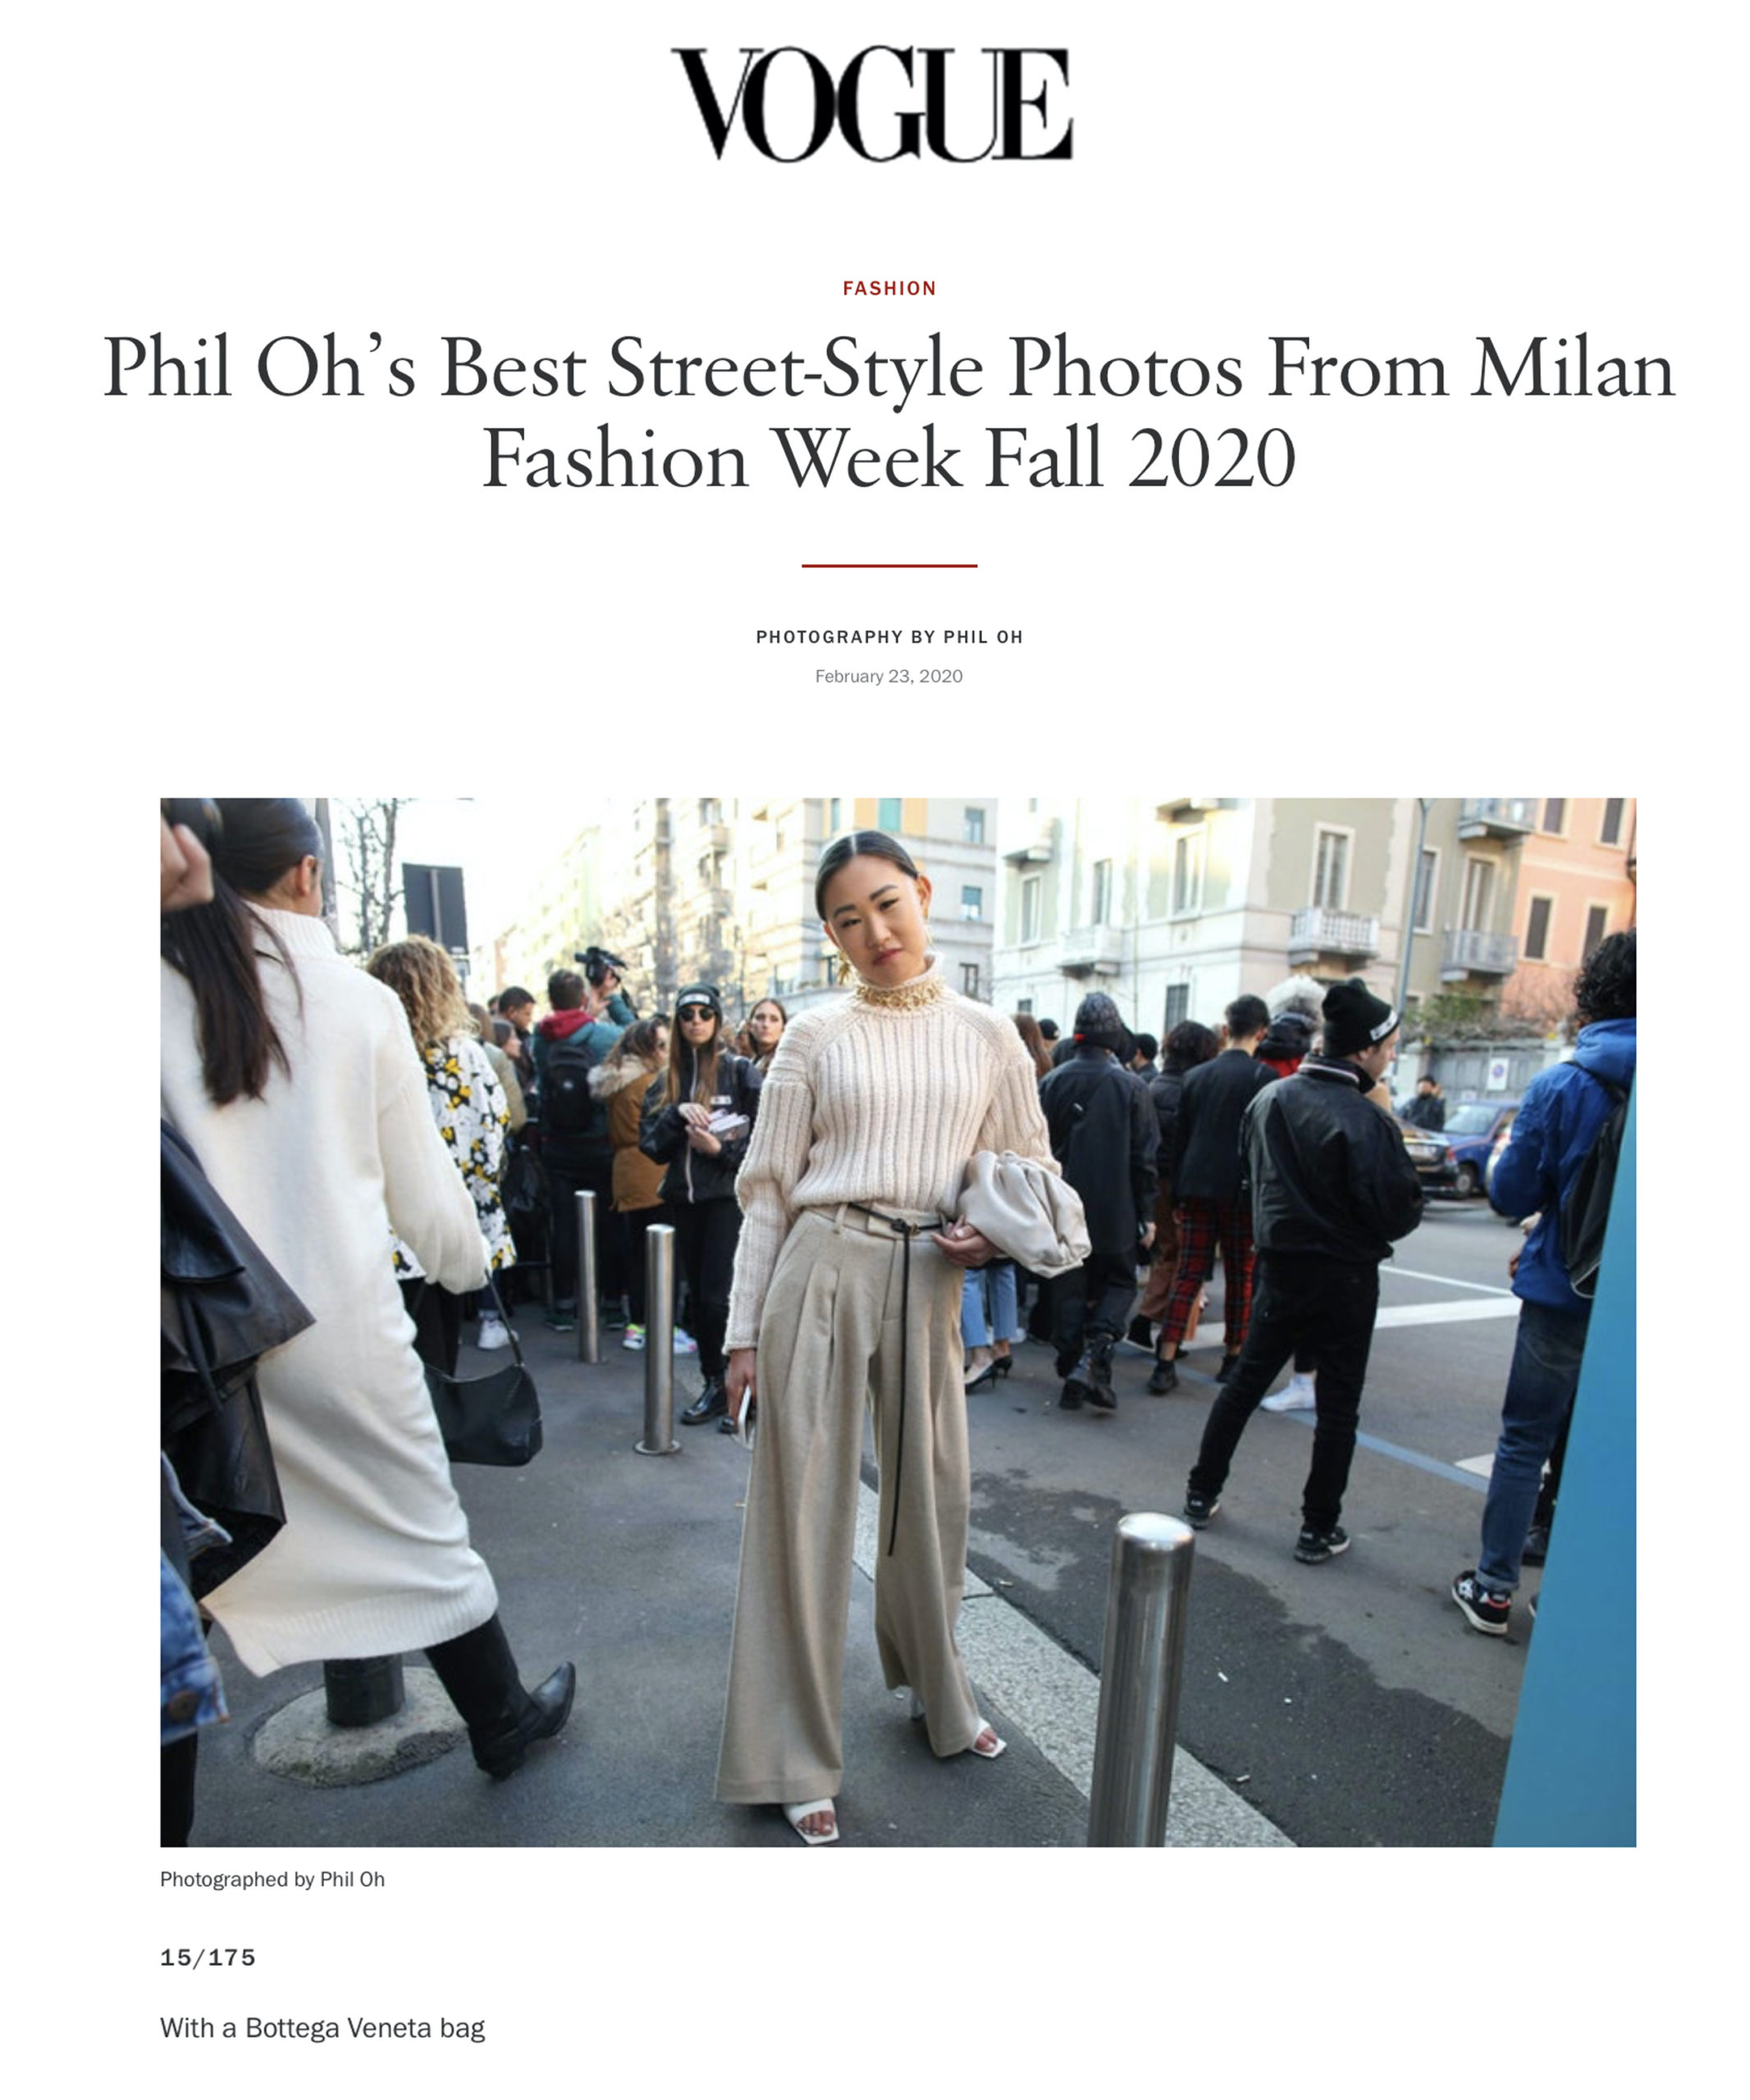 Vogue: Phil Oh’s Best Street Style Photos From Milan Fashion Week Fall 2020